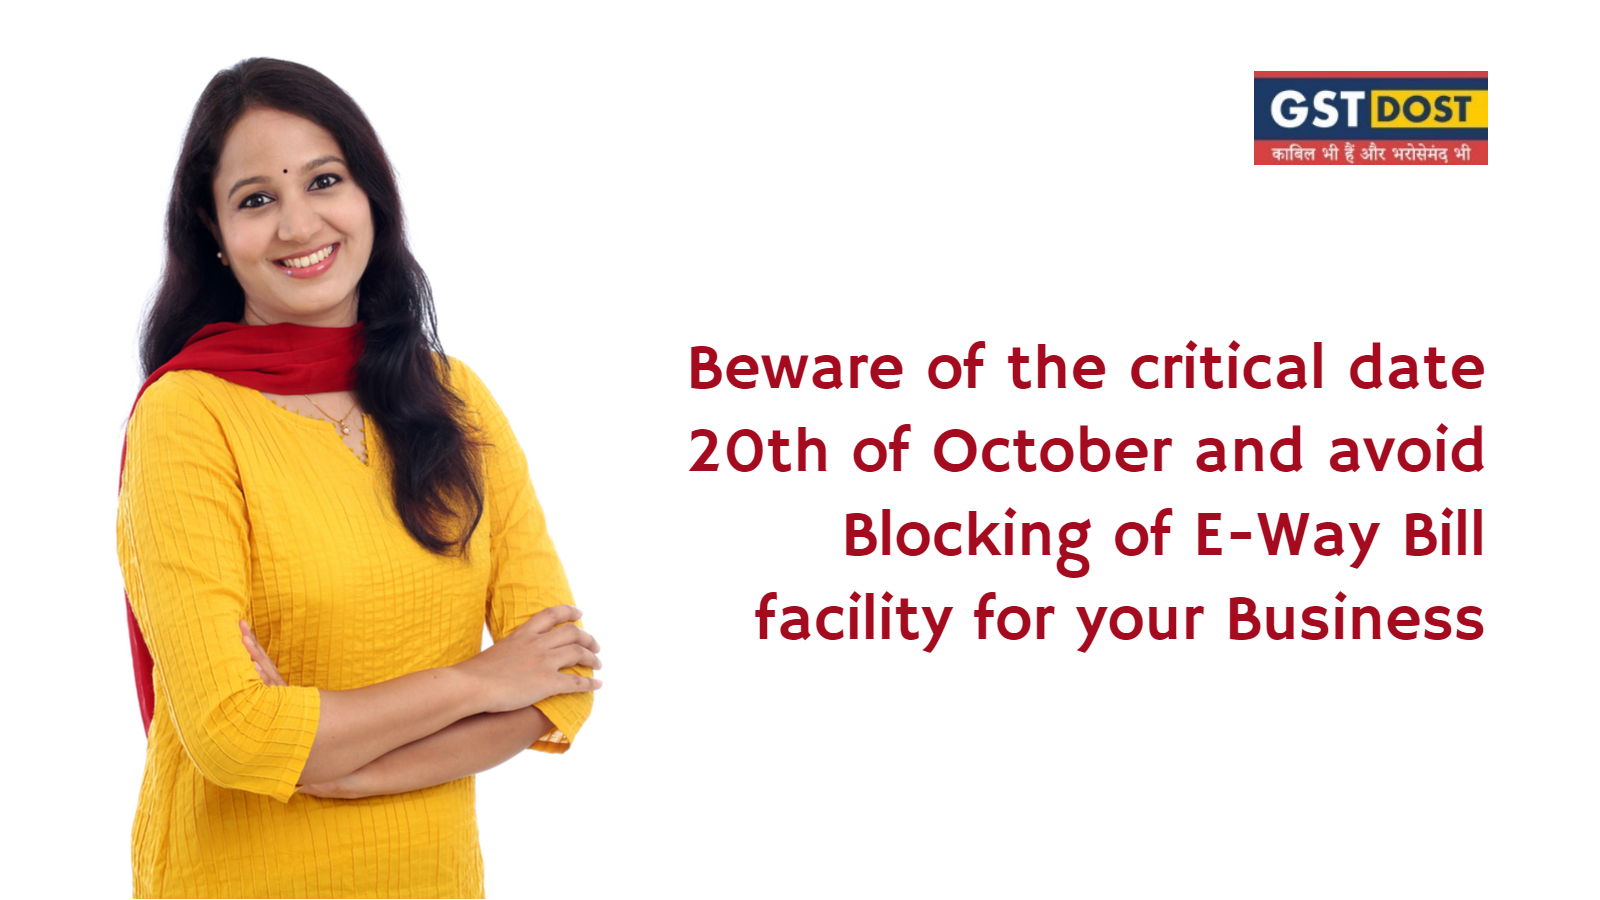 Beware of the critical date 20th of October and avoid blocking of E-Way Bill facility for your Business